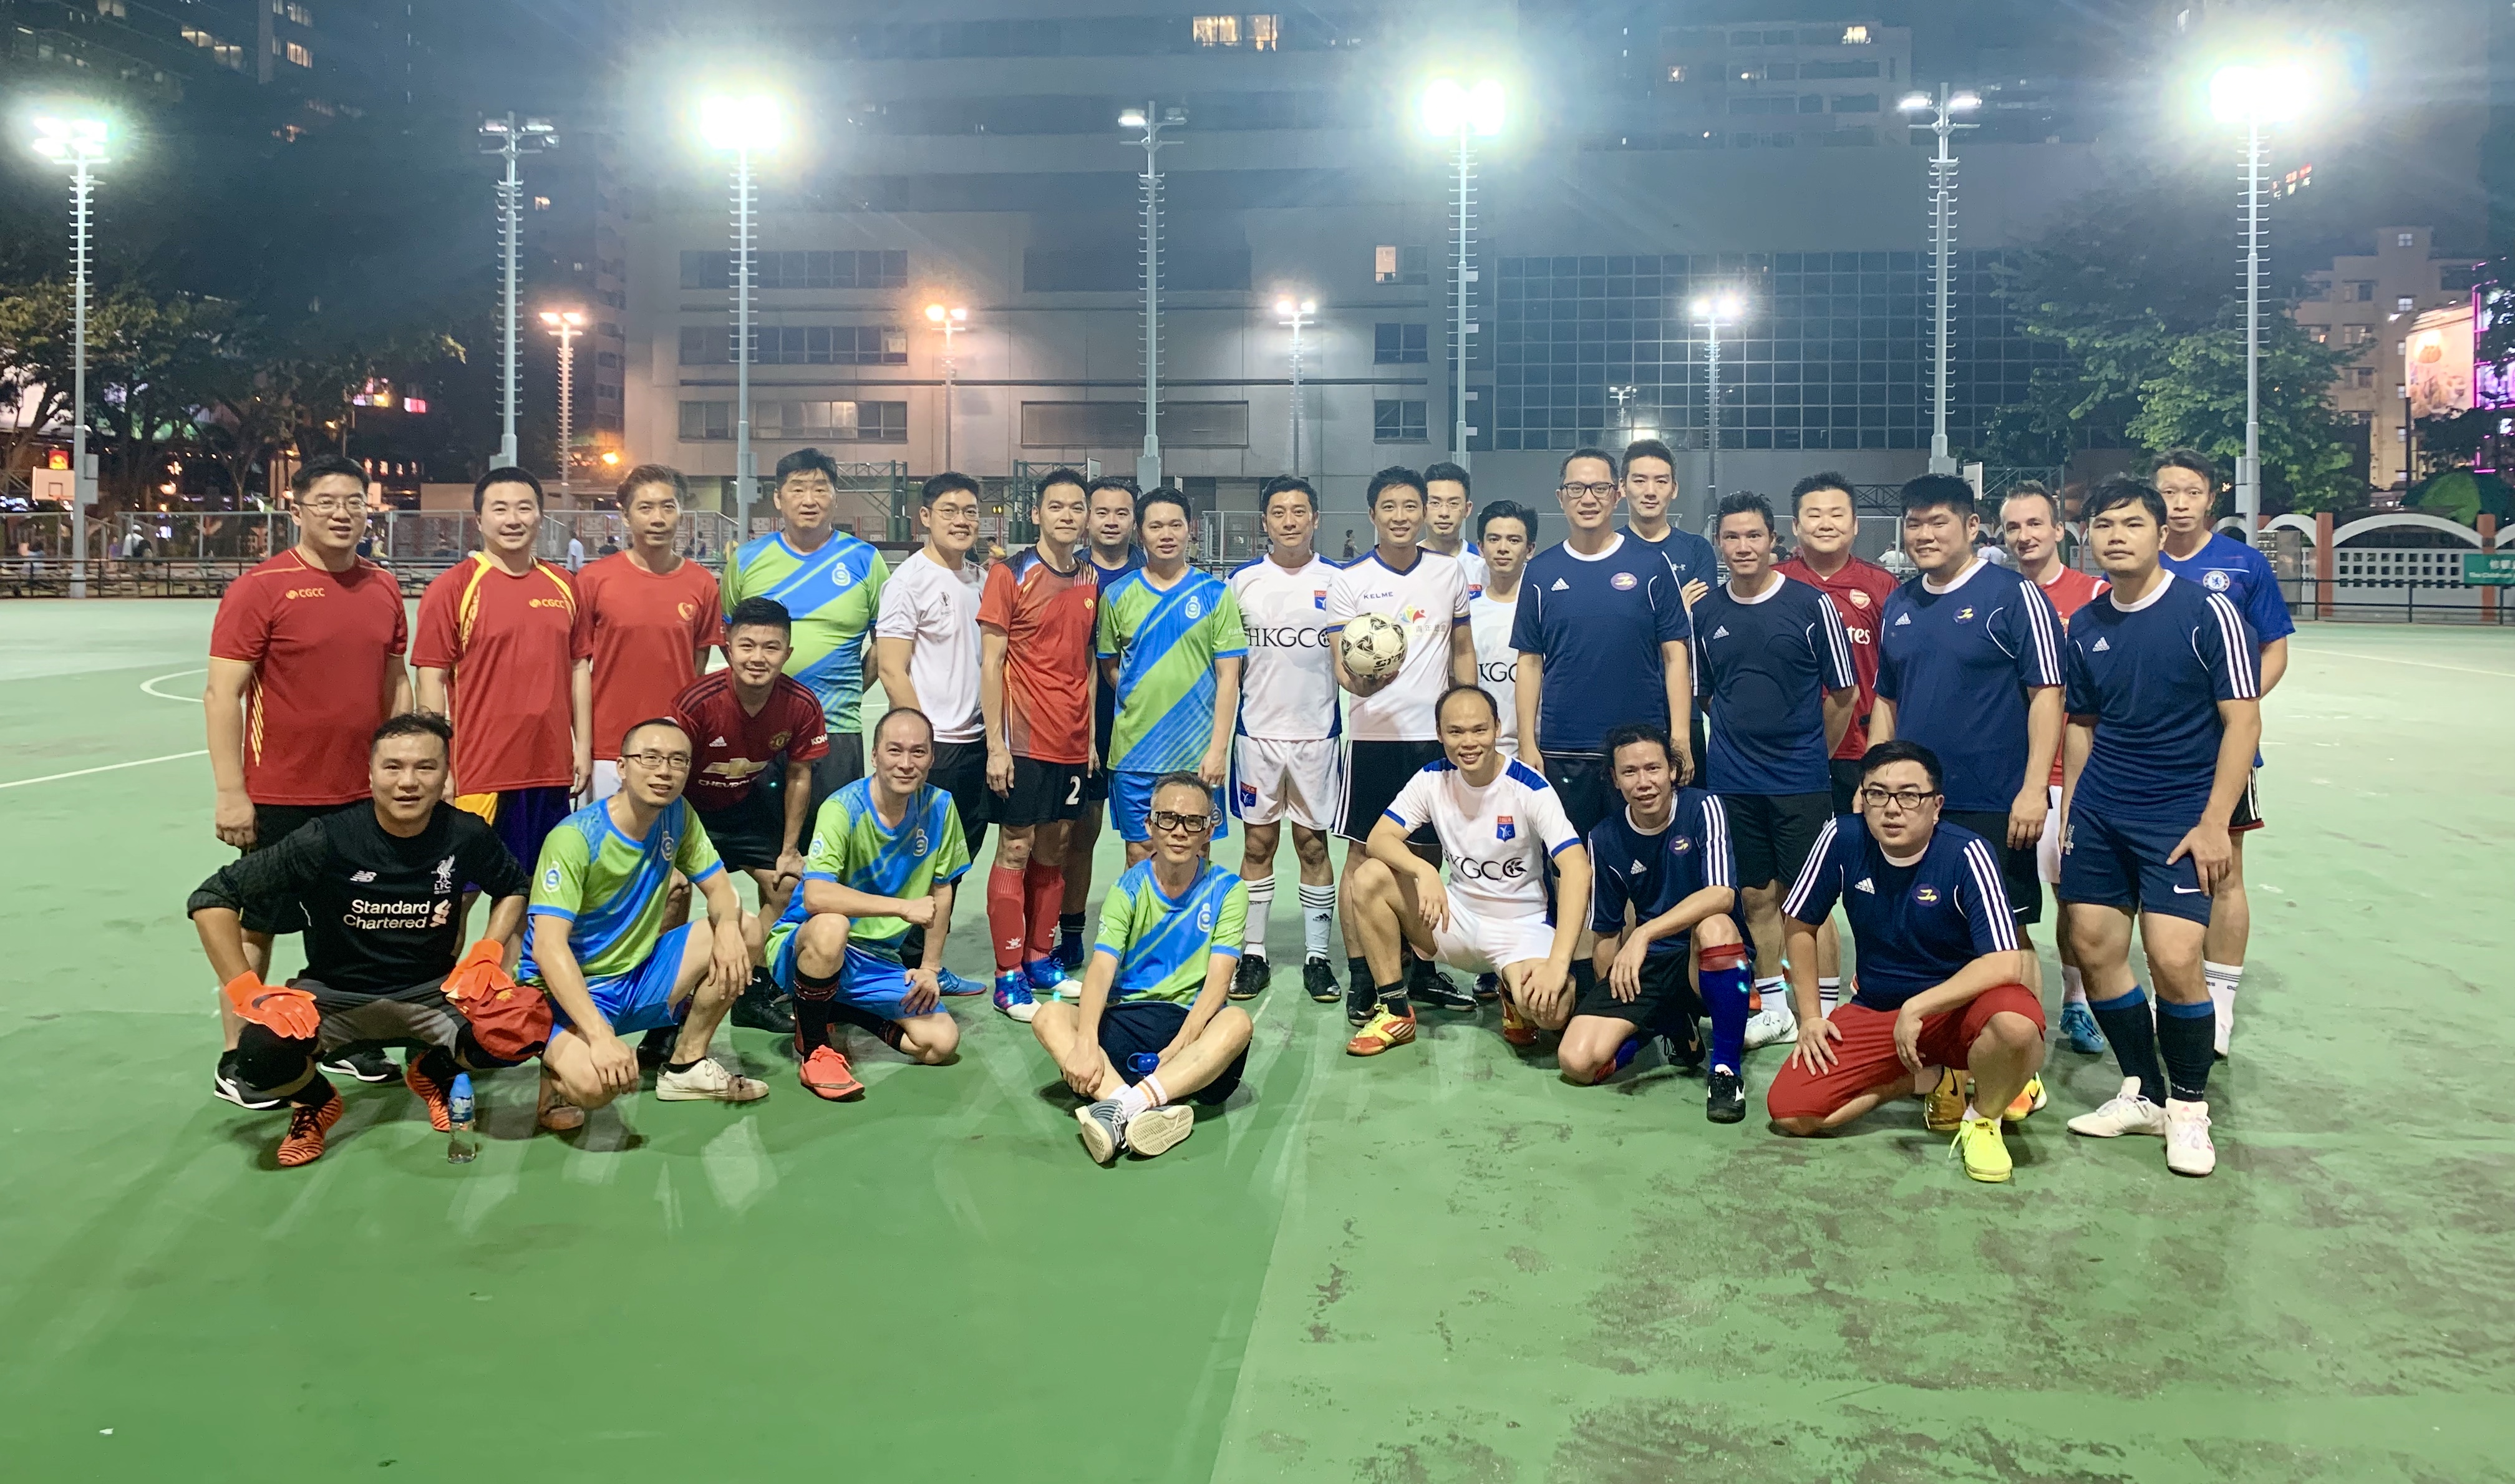 YEC Chairman Eric Fok led the club’s football team to participate in a friendly match.